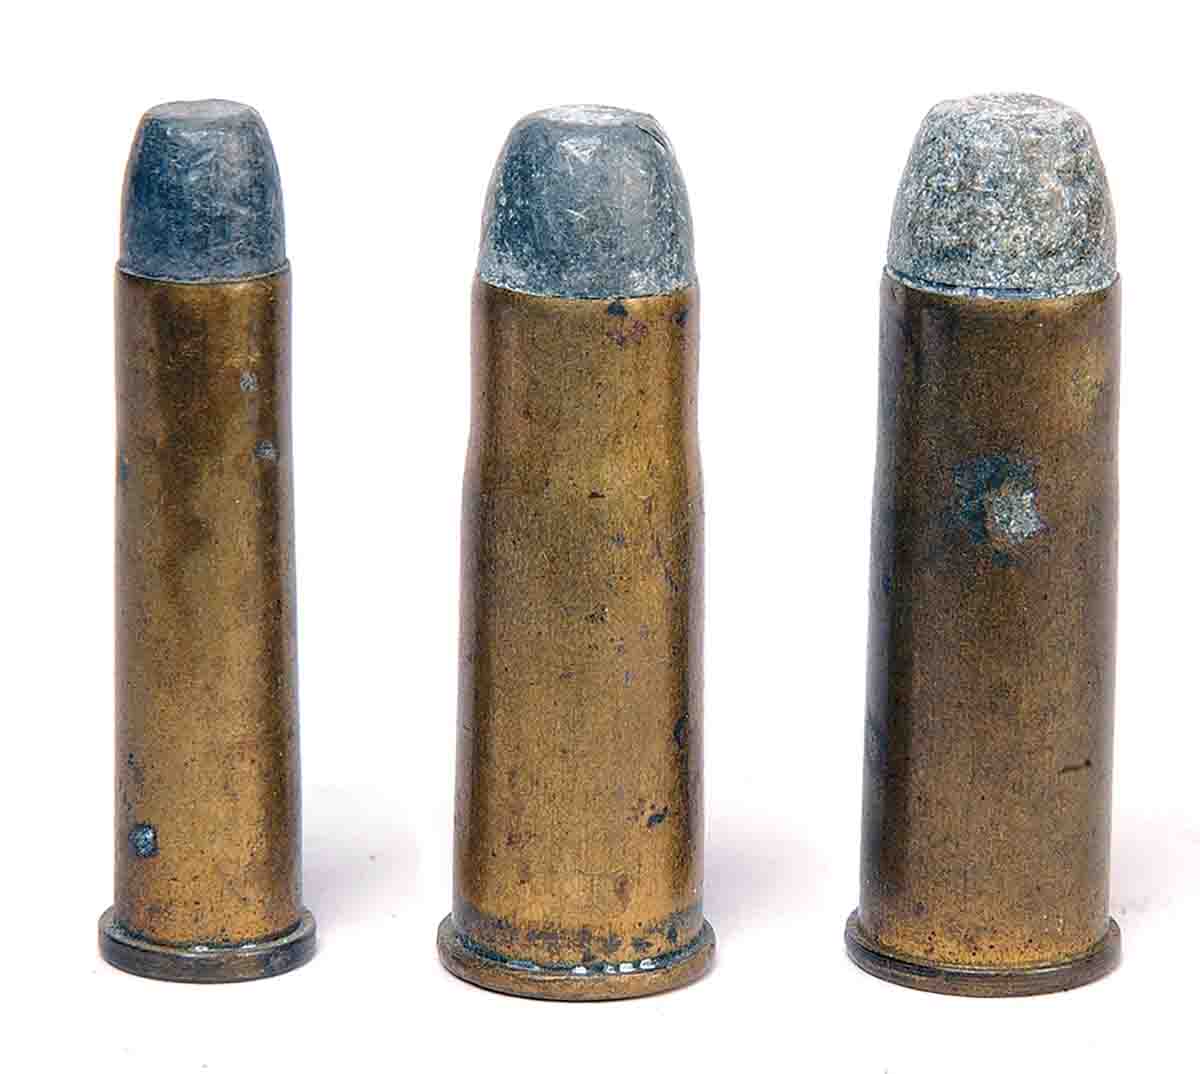 Between 1873 and 1882, Winchester chambered the Model 1873 for these black powder cartridges (left to right): the .32 WCF (.32-20), .38 WCF (.38-40) and the .44 WCF (.44-40). Between 1873 and 1882, Winchester chambered the Model 1873 for these black powder cartridges (left to right): the .32 WCF (.32-20), .38 WCF (.38-40) and the .44 WCF (.44-40).